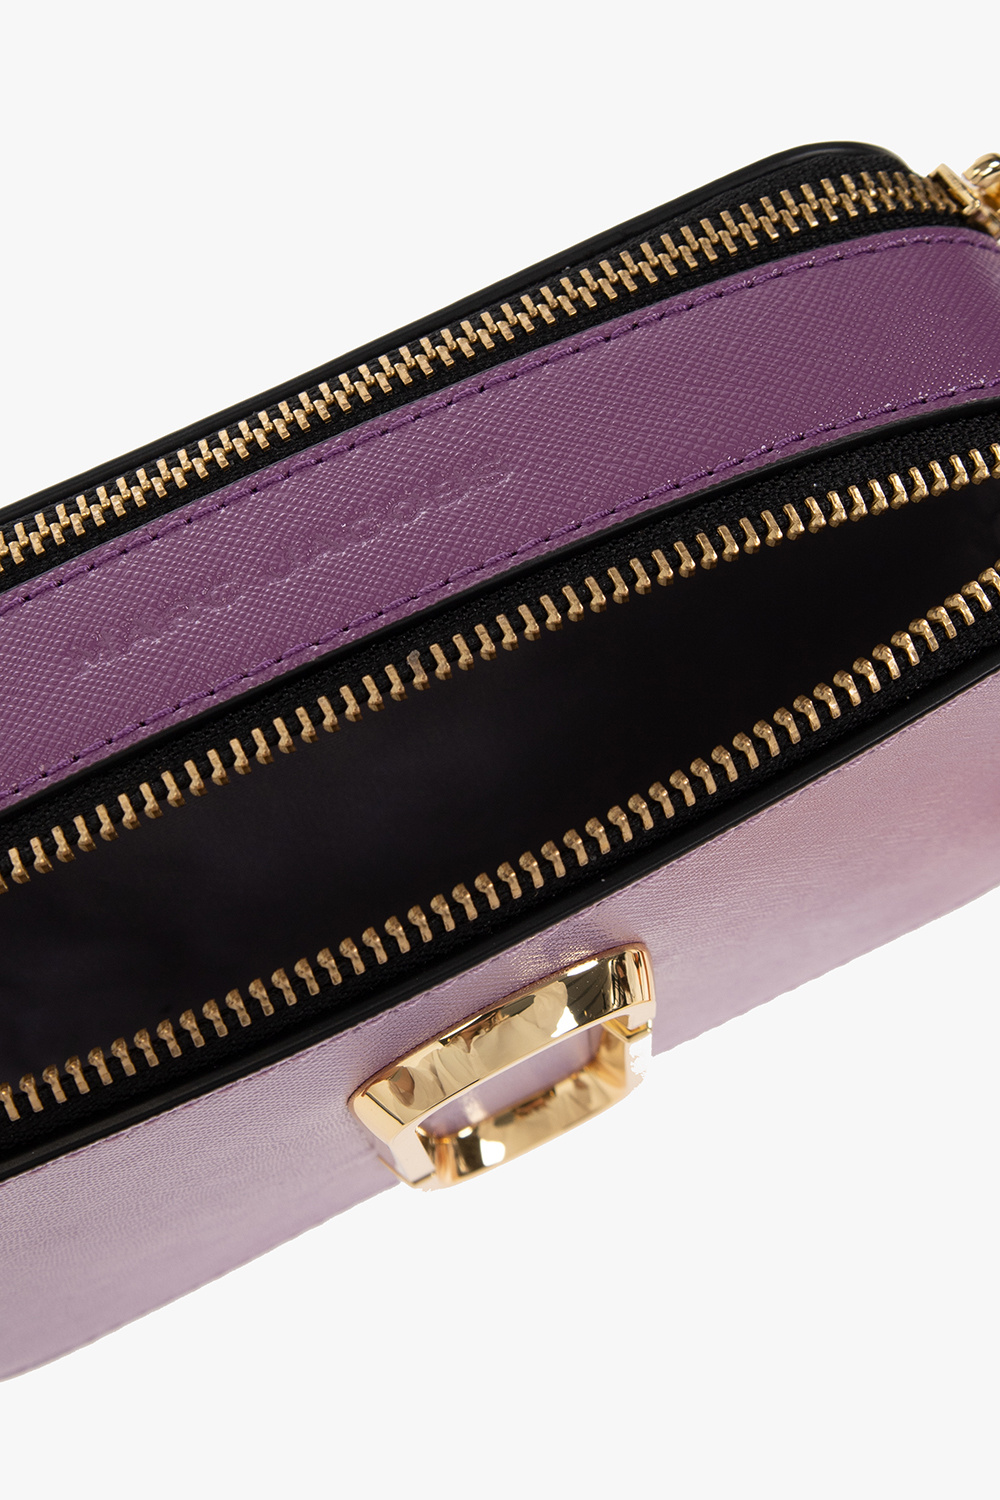 Snapshot leather crossbody bag Marc Jacobs Purple in Leather